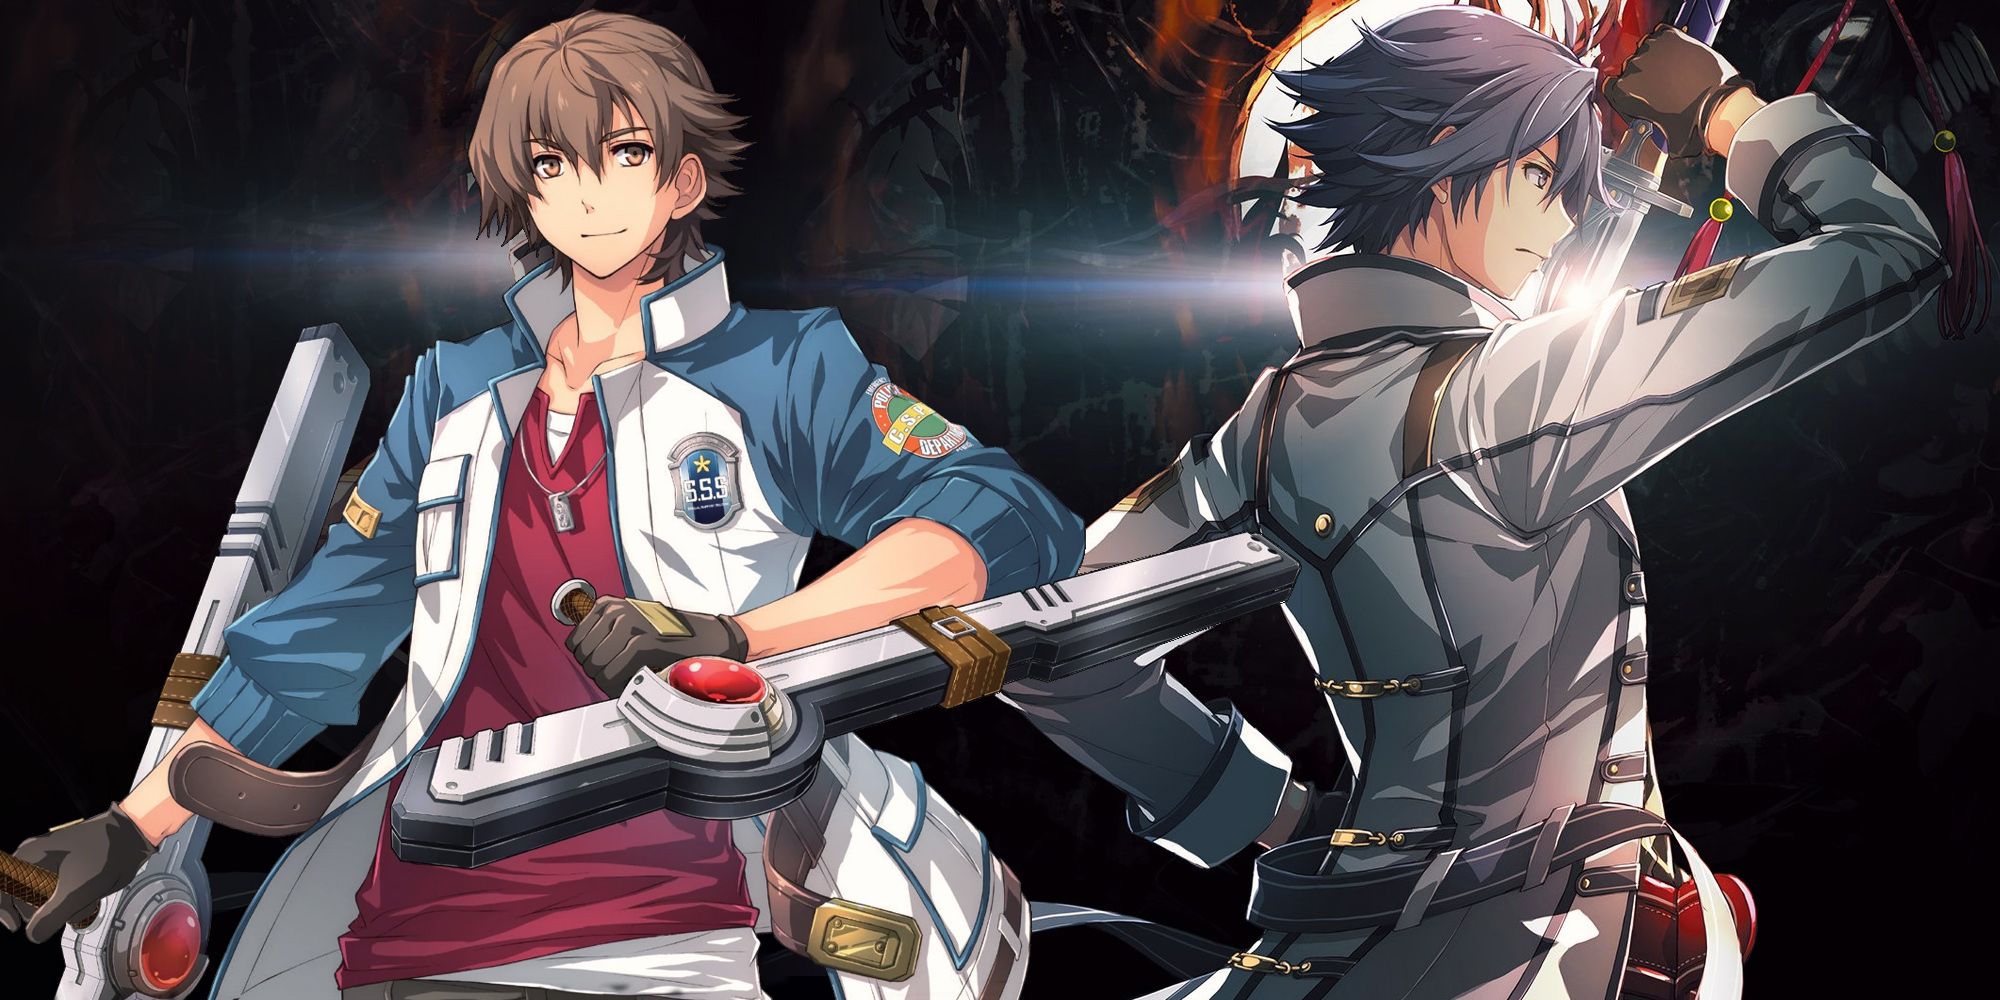 Protagonists Lloyd and Rean from The Legend of Heroes: Trails into Reverie